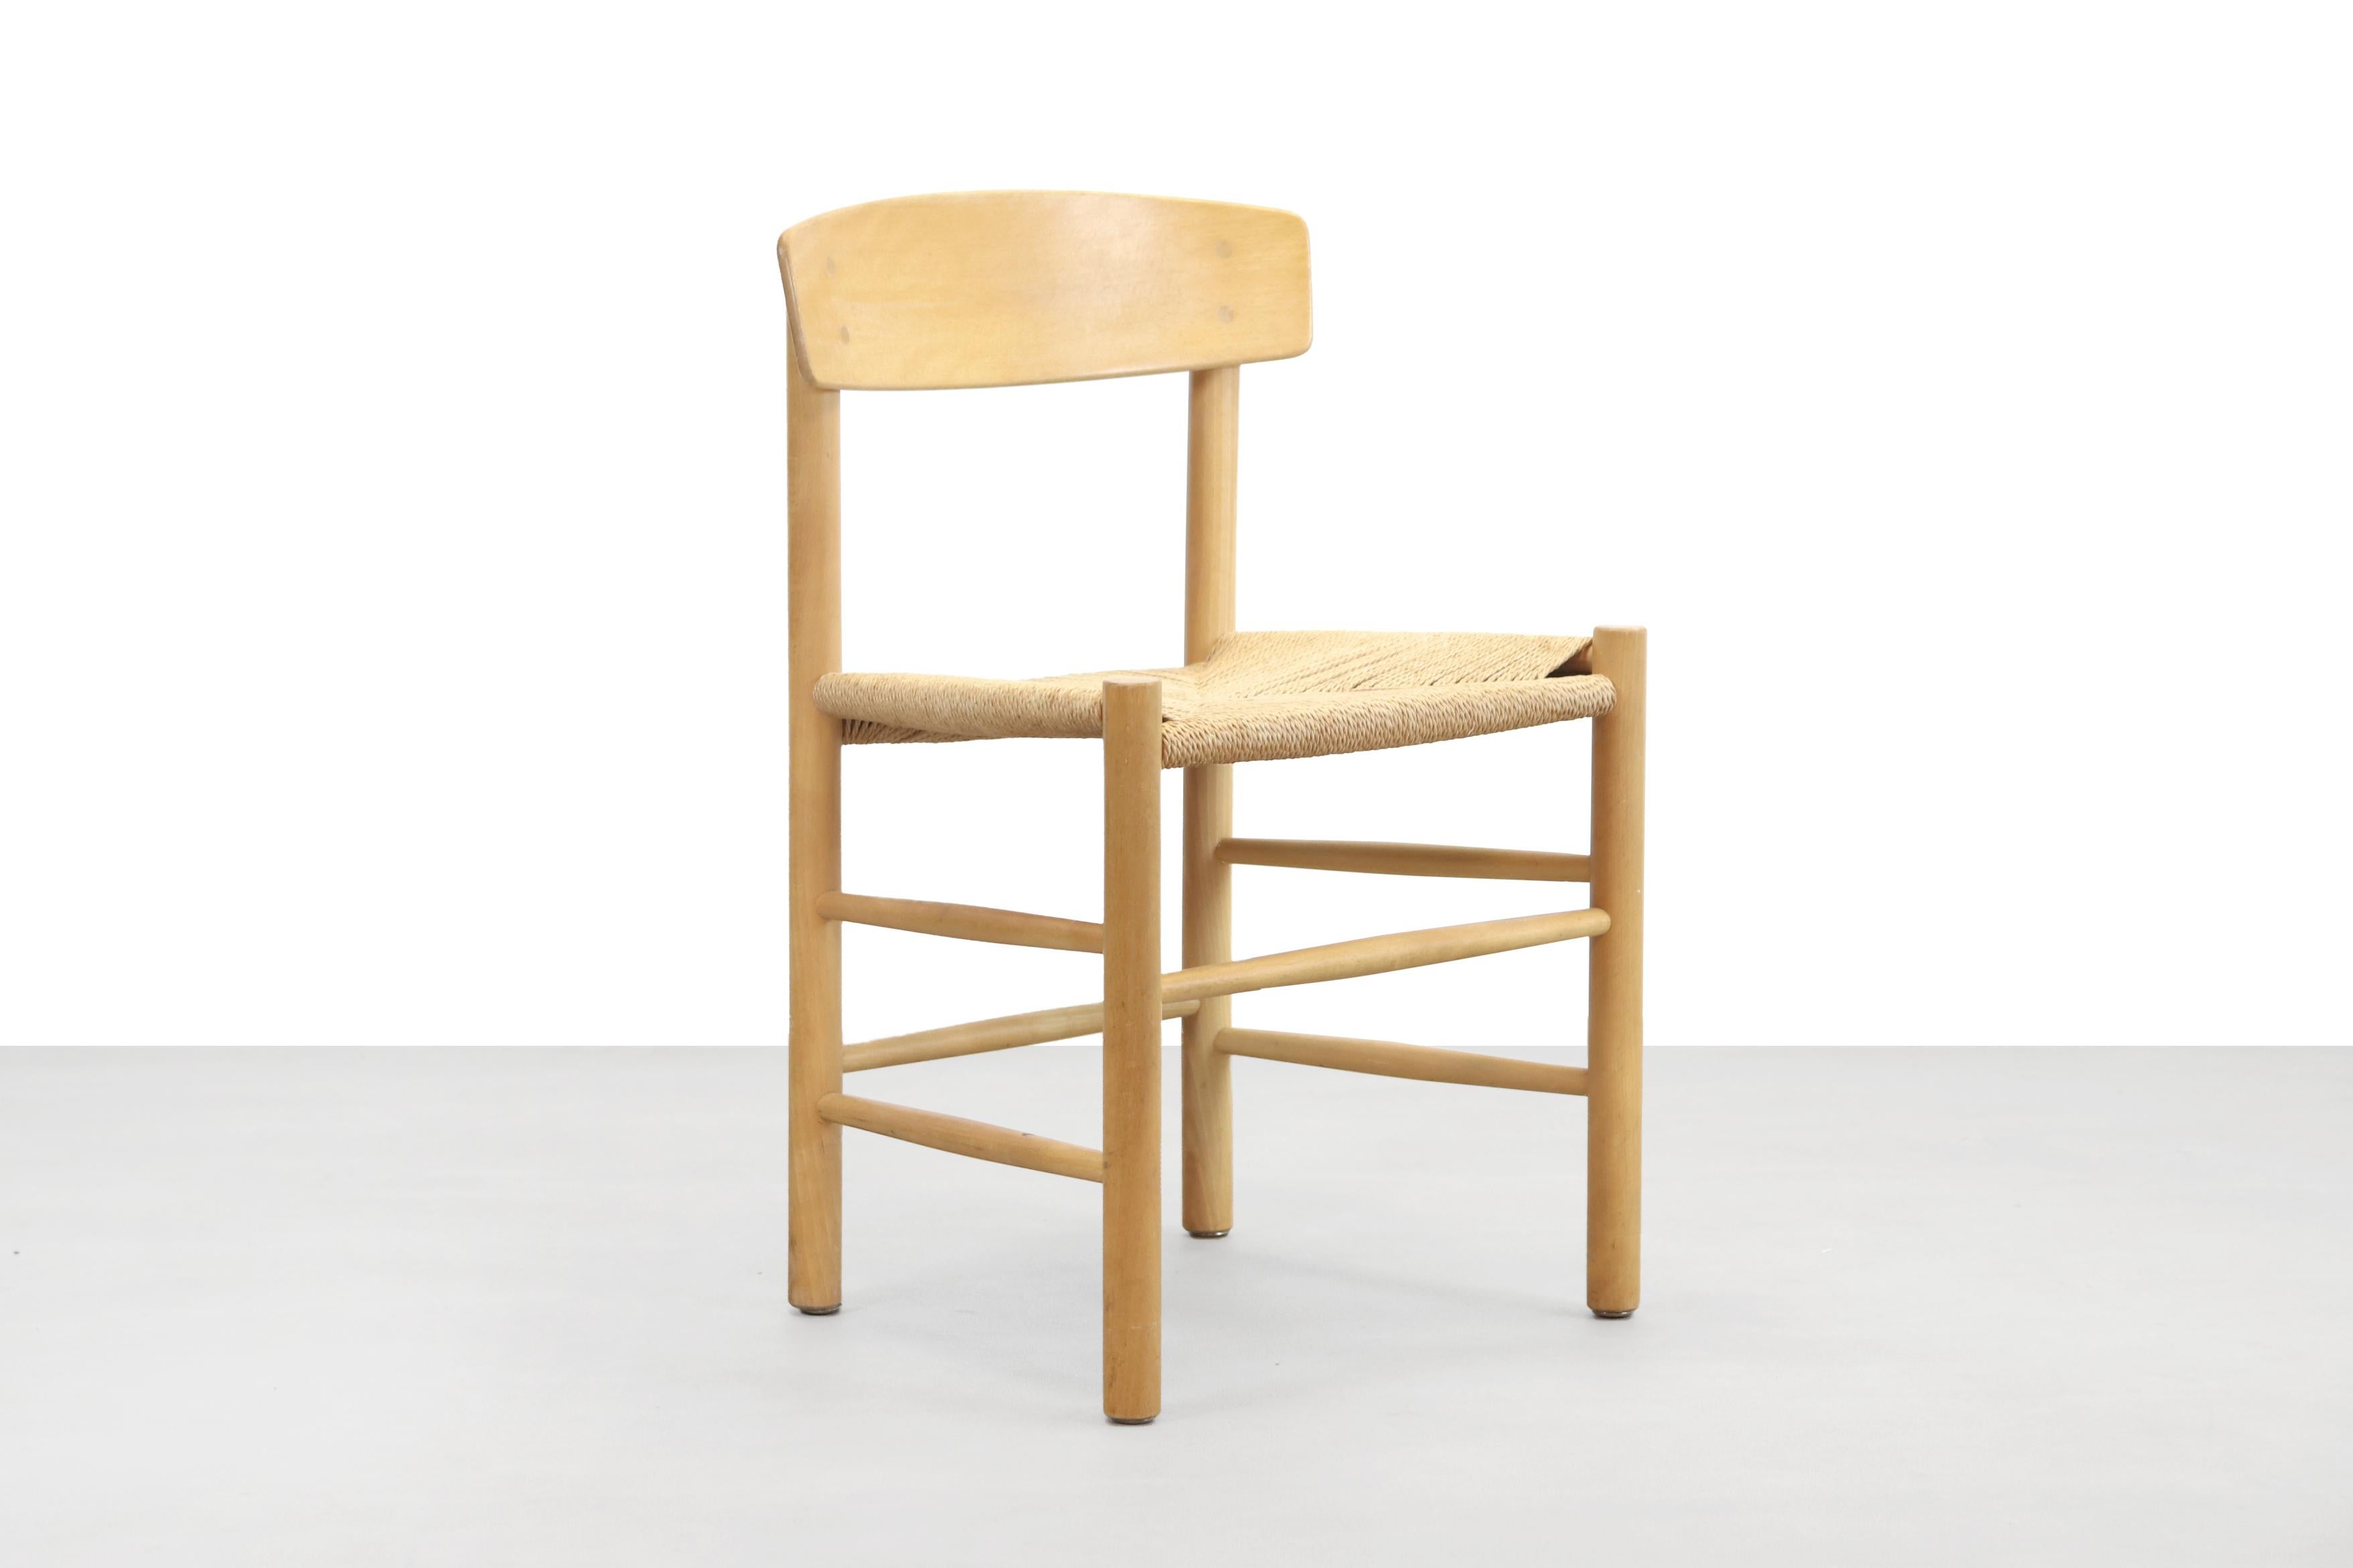 Iconic dining room chair designed by Børge Mogensen in 1947. This chair is made of beech wood and is manufactured in the 1960s. The paper cord seat is original and in very good condition. The peoples chair, as it is called, actually has model name